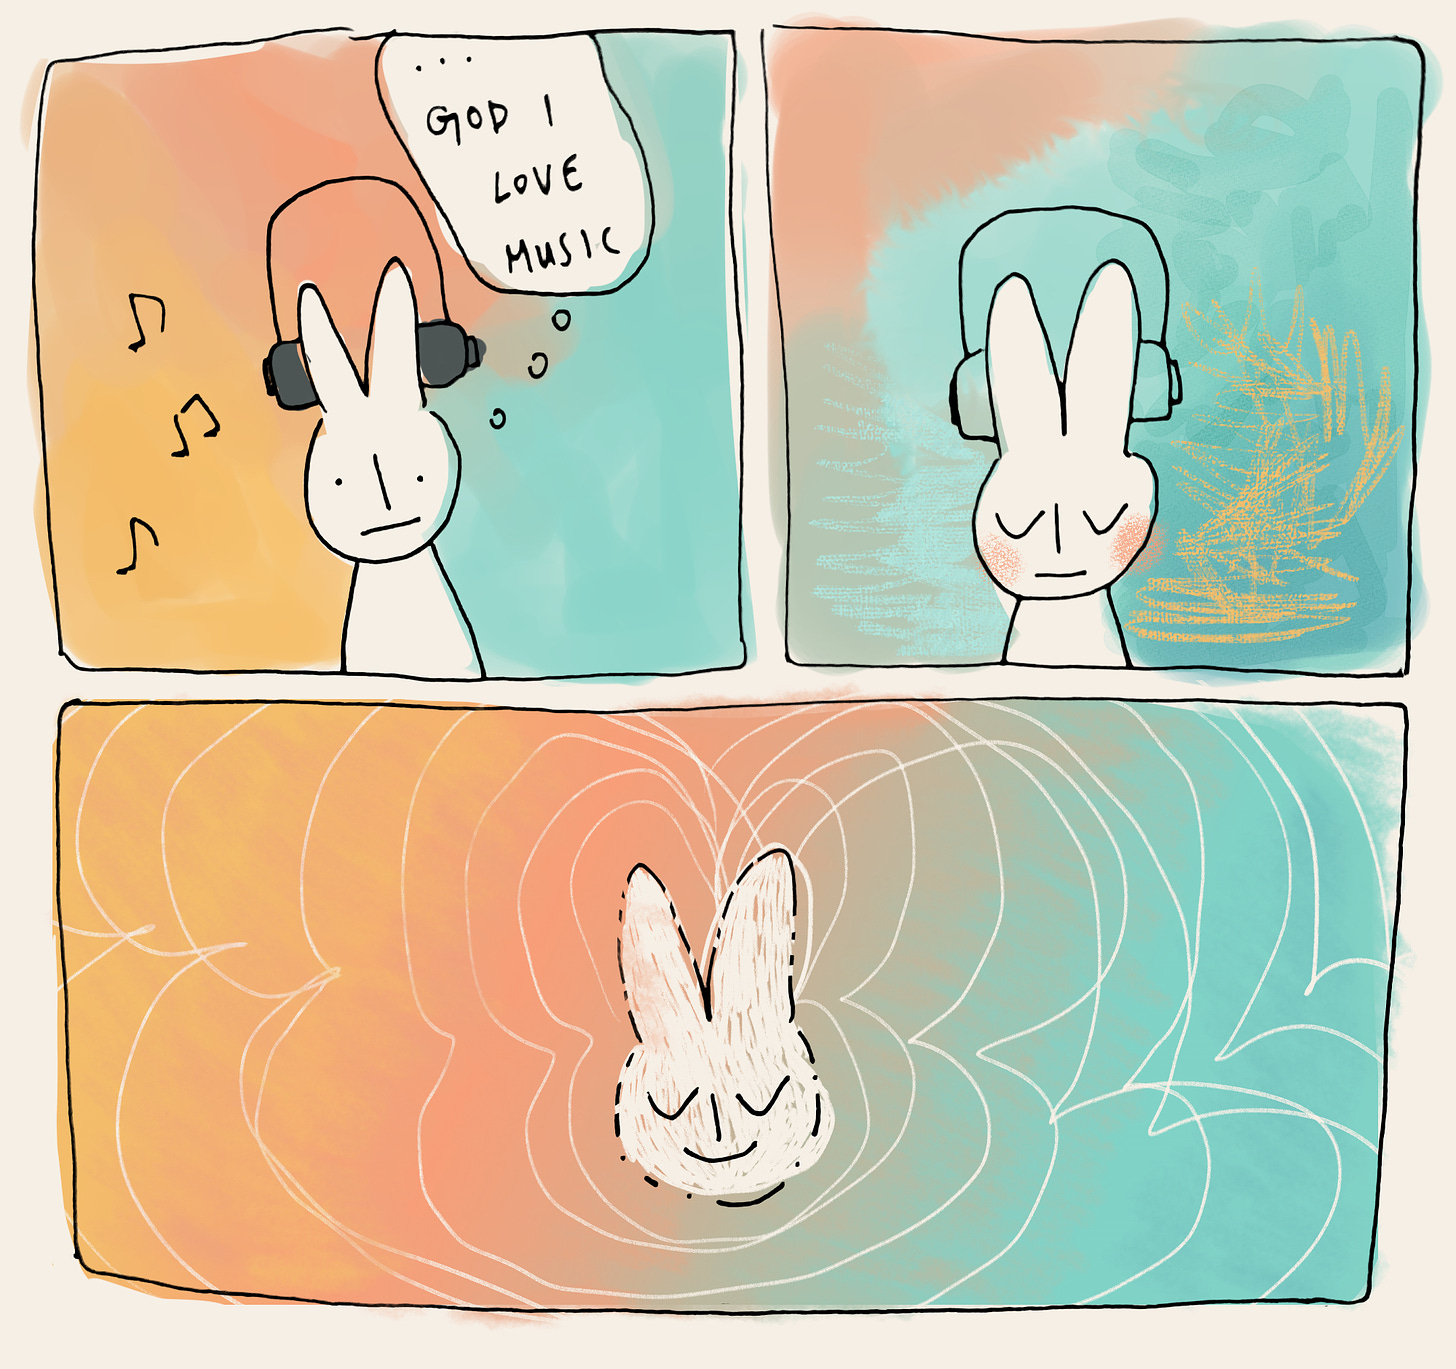 comic of a rabbit thinking ,god, i love music, and a bunch of colours around them